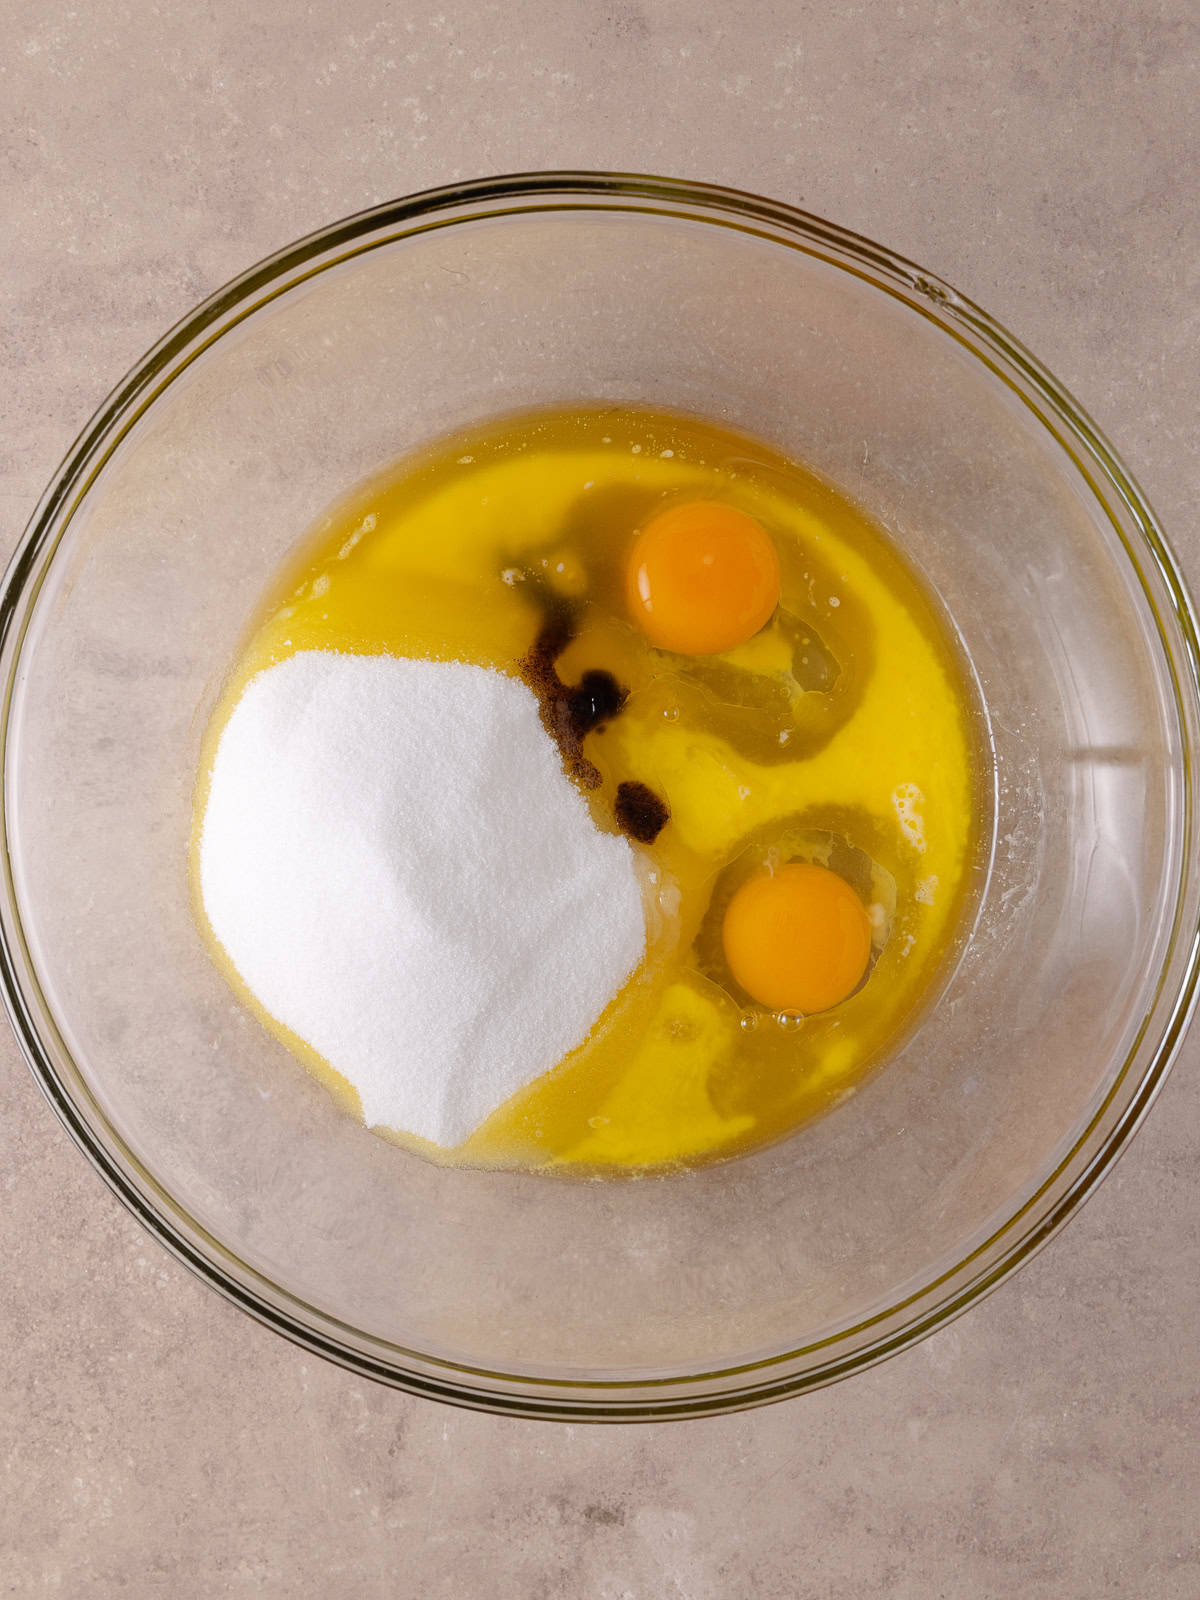 Melted butter, whole eggs, white sugar and vanilla are added to a large glass mixing bowl.